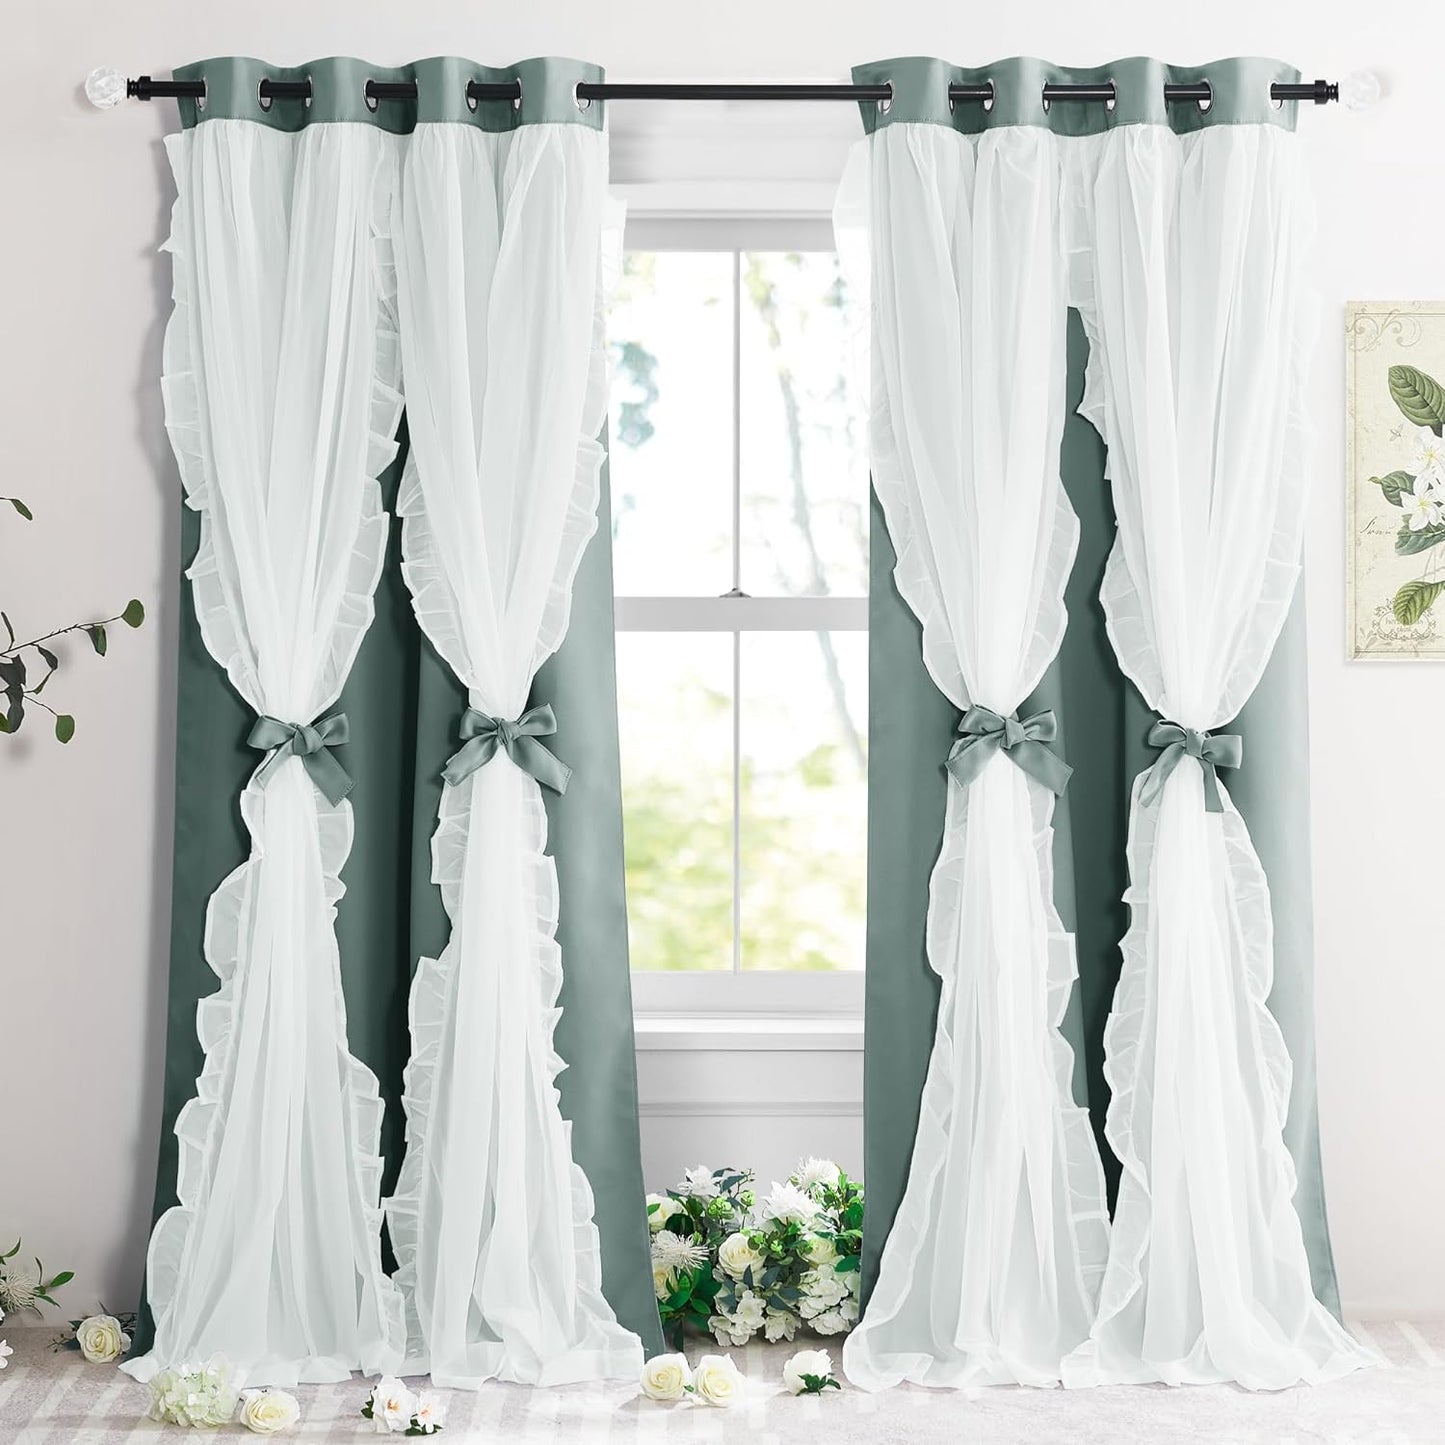 PONY DANCE Blackout Curtains for Living Room Decor Window Treatment Double Layer Drapes Ruffle Sheer Overlay Farmhouse Rustic Design, W 52 X L 84 Inches, Sage Green, 2 Panels  PONY DANCE Fluorescent Blue 52" X 84" 